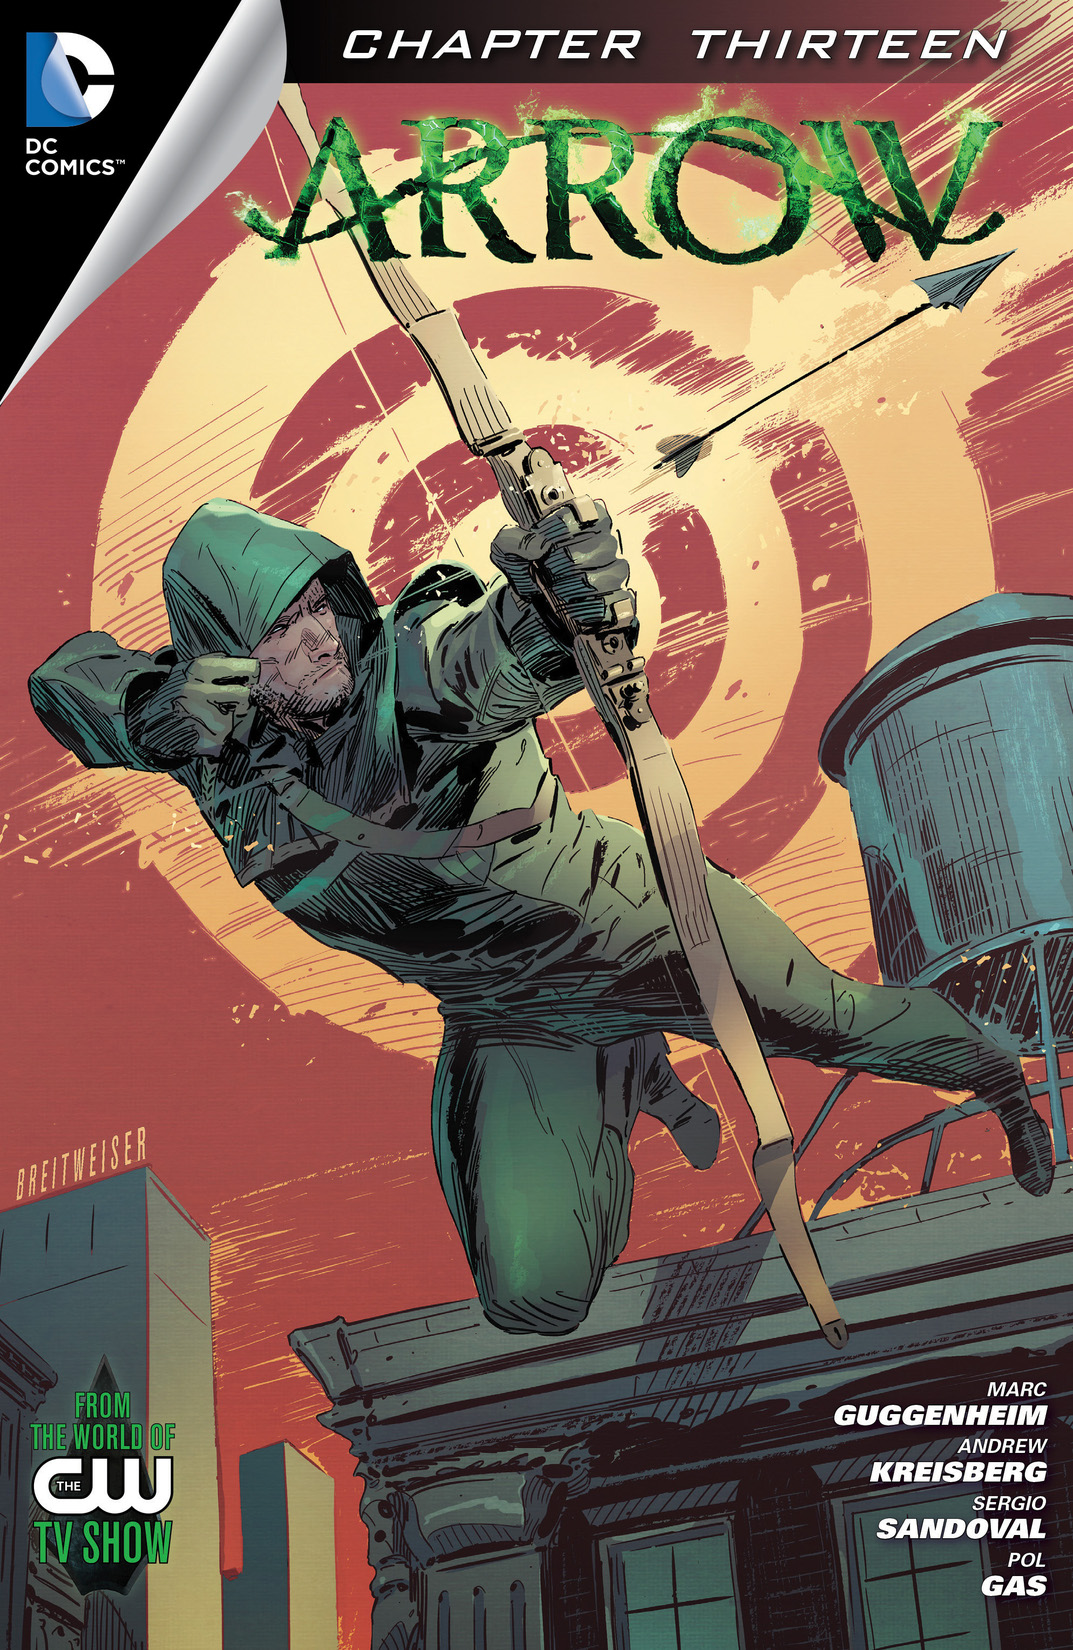 Arrow #13 preview images